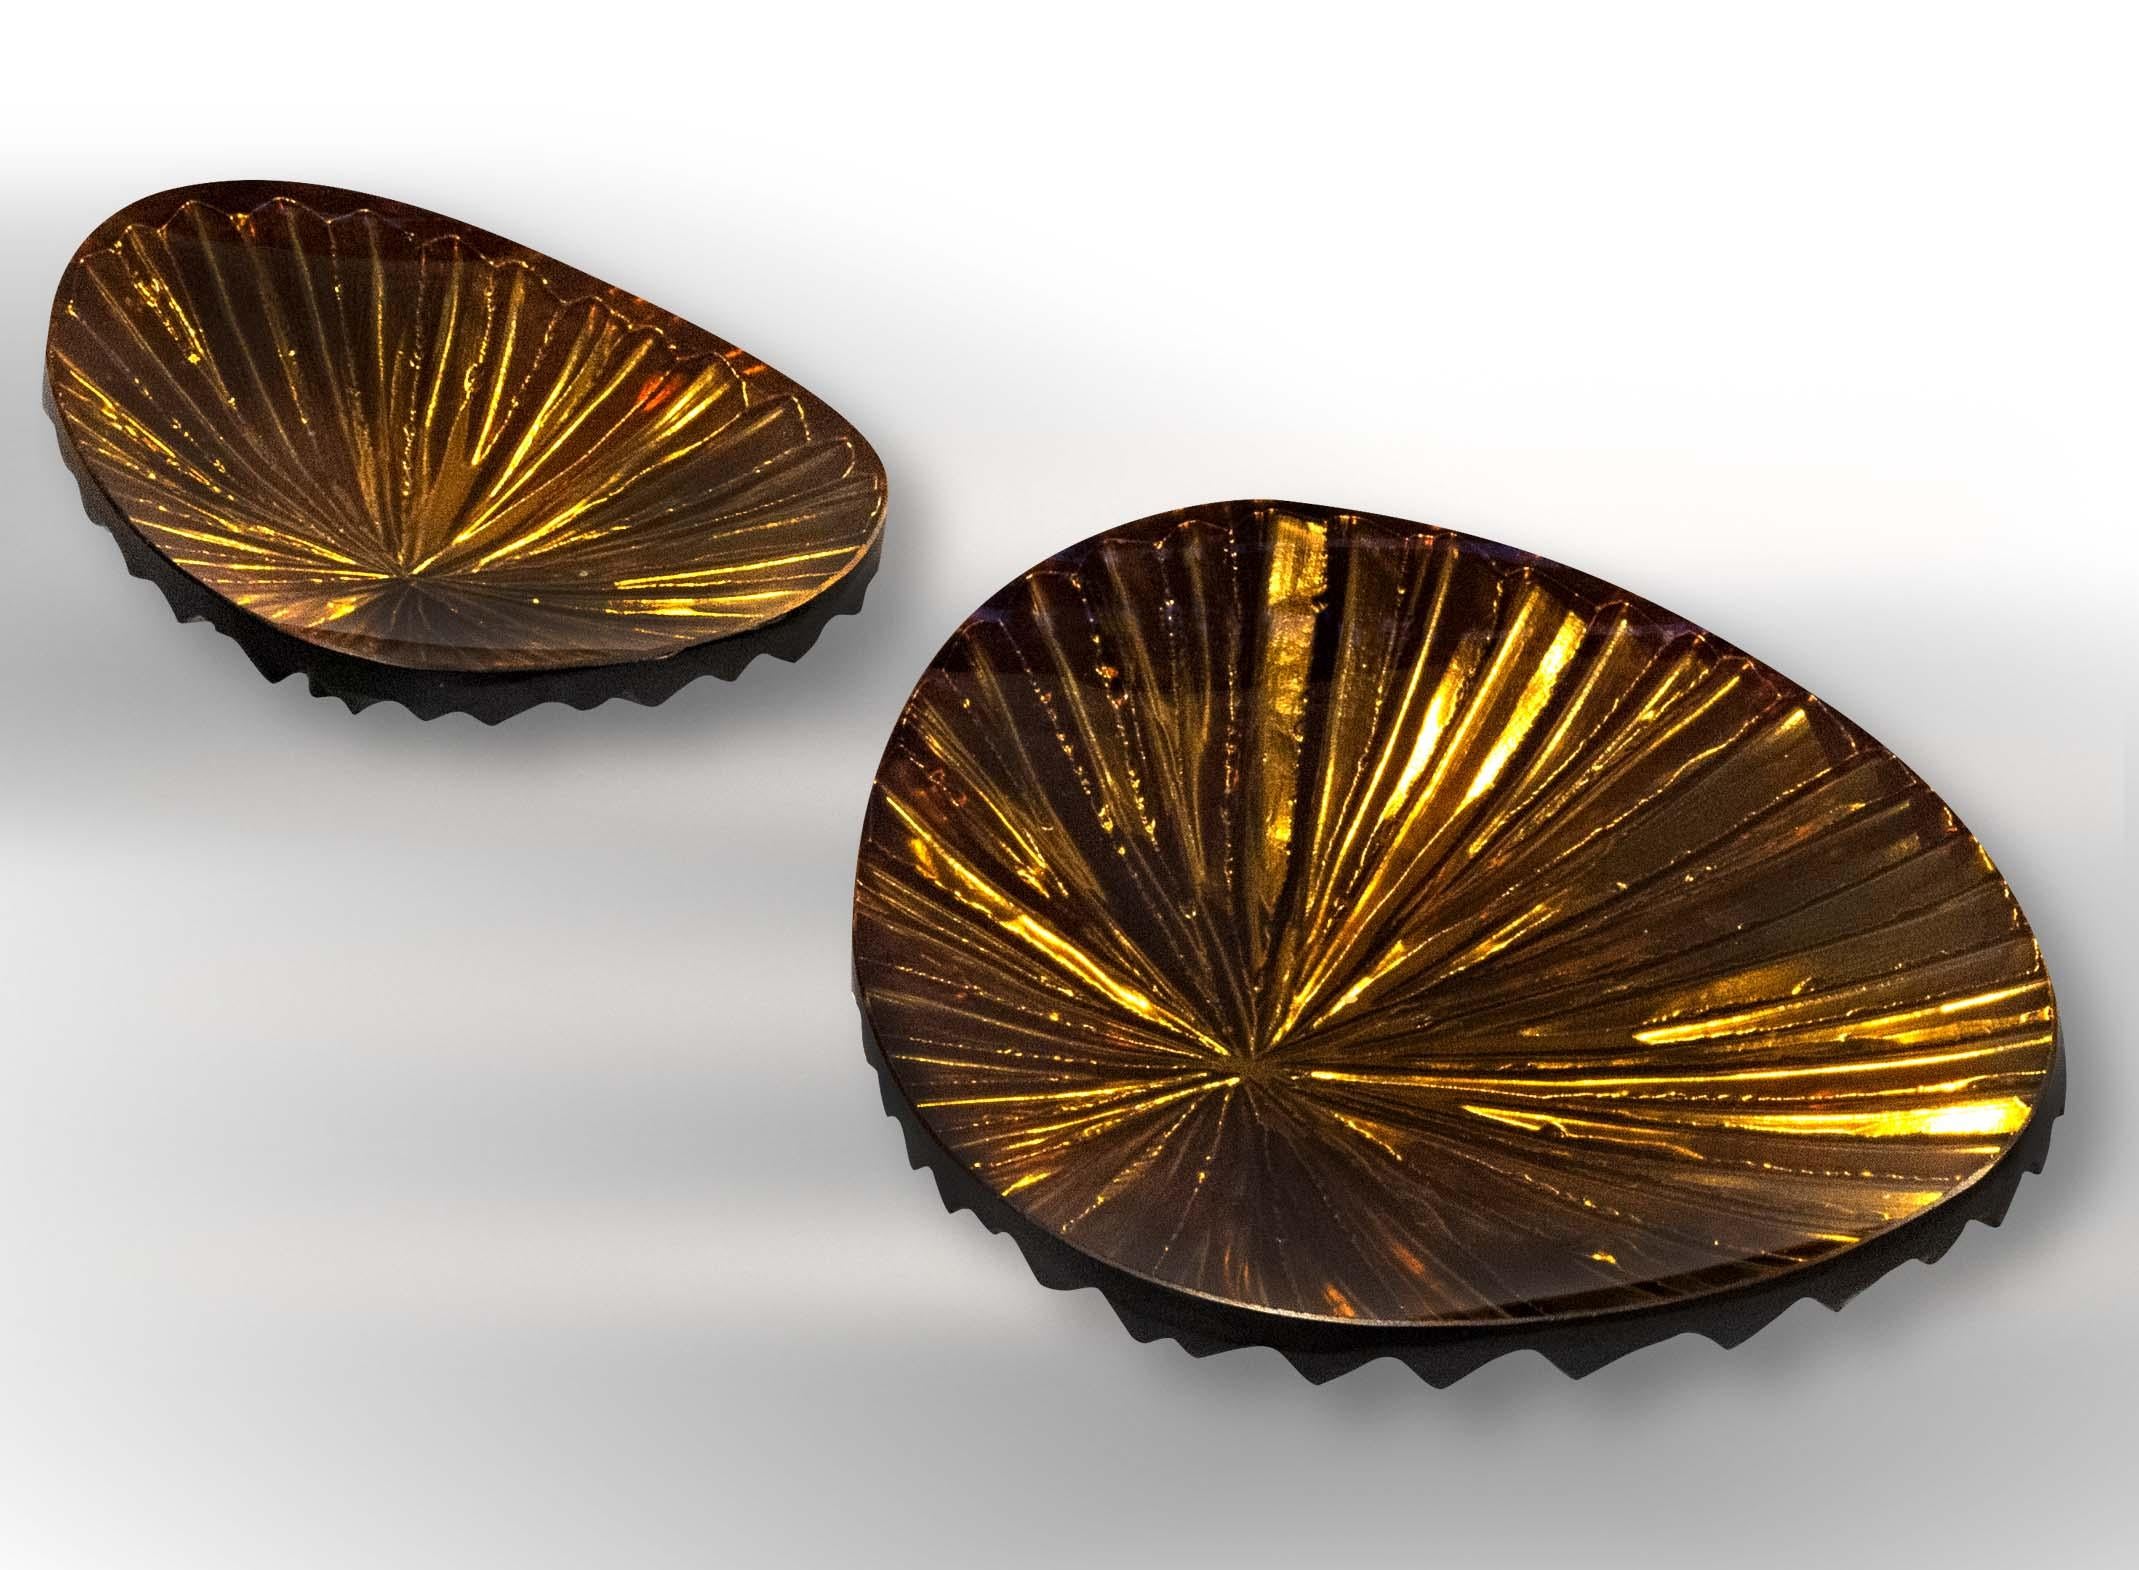 Modern Contemporary 'Oasi' Bowl Amber and Gold Crystal Small Size by Ghirò Studio For Sale